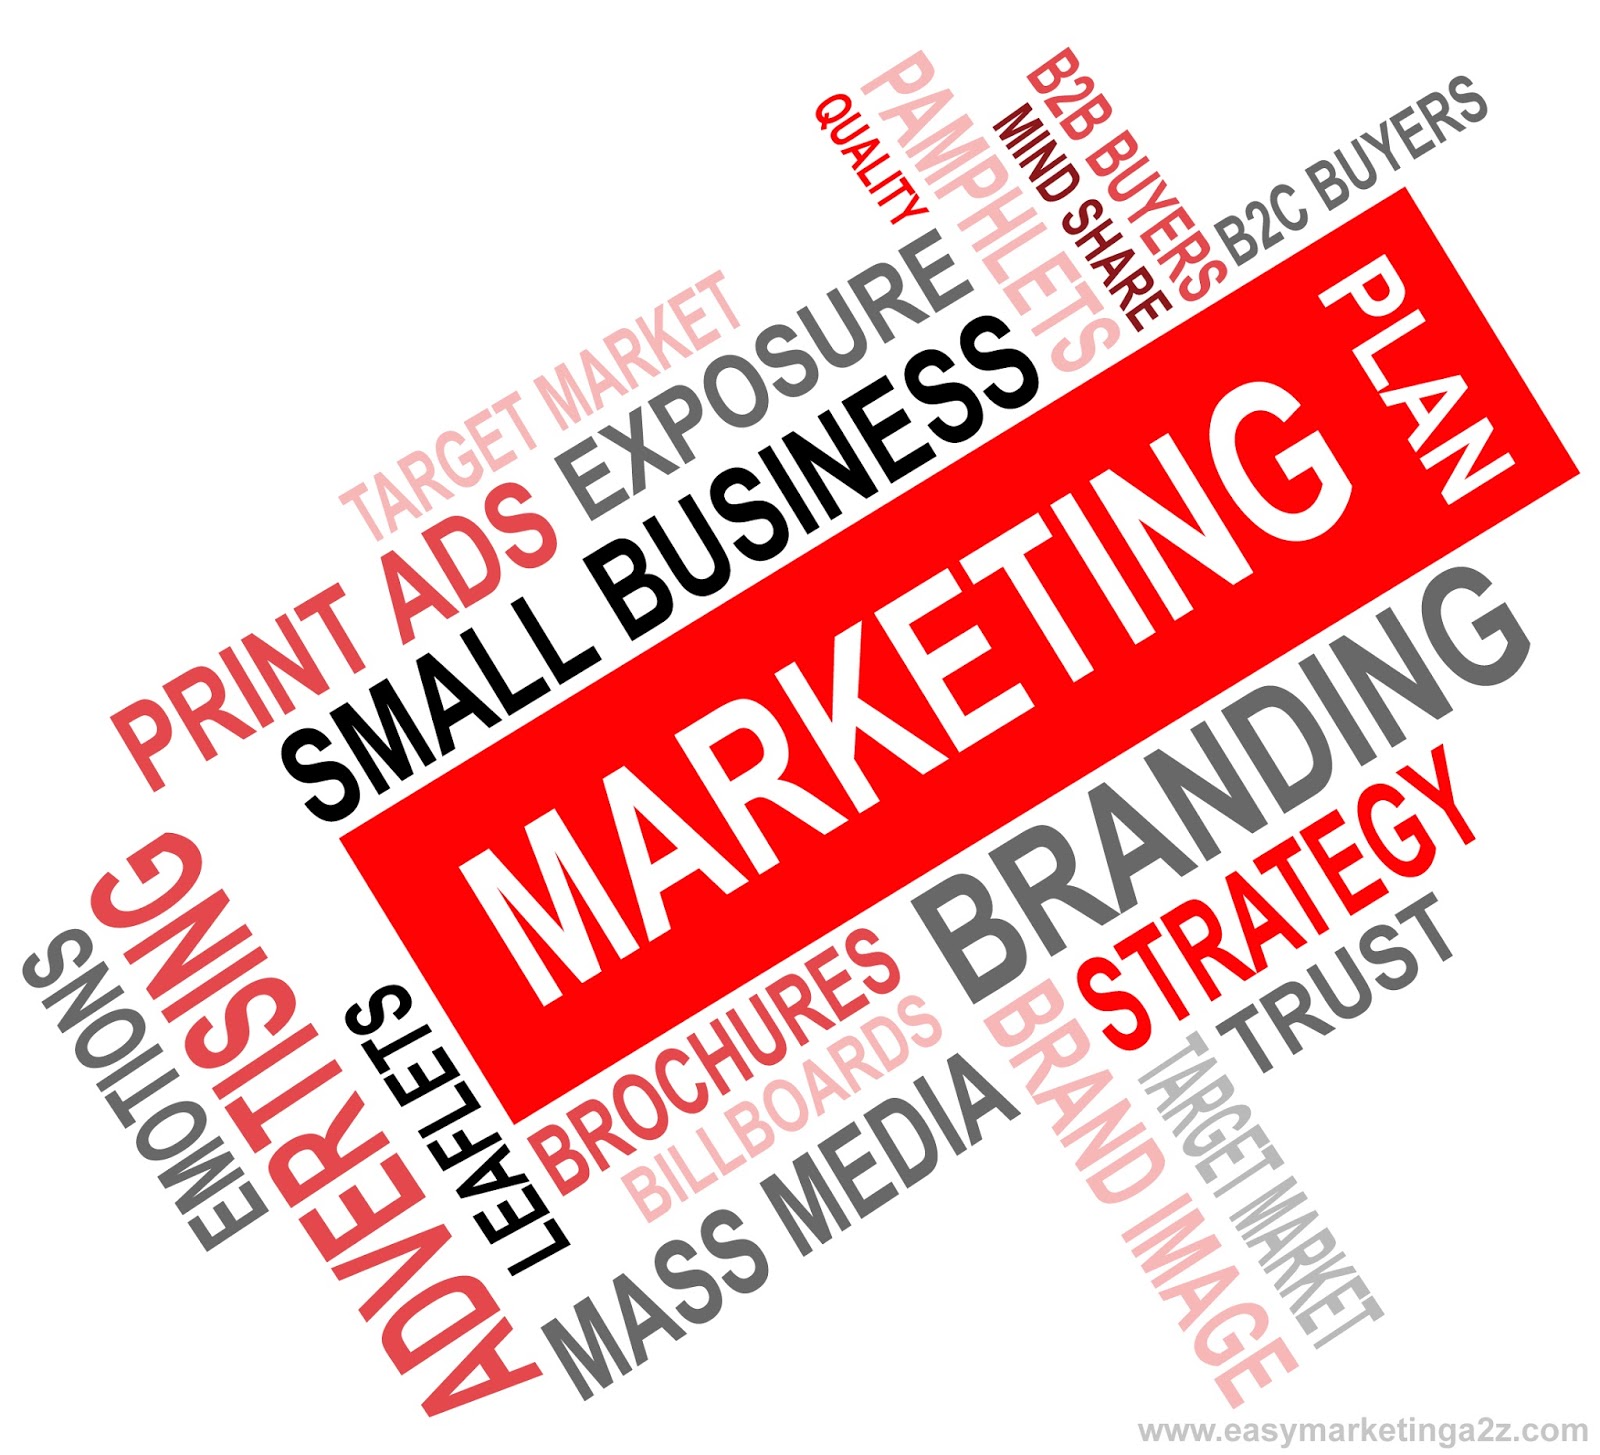 Very Simple Marketing Plan For Any Small Business Easy Marketing A2z